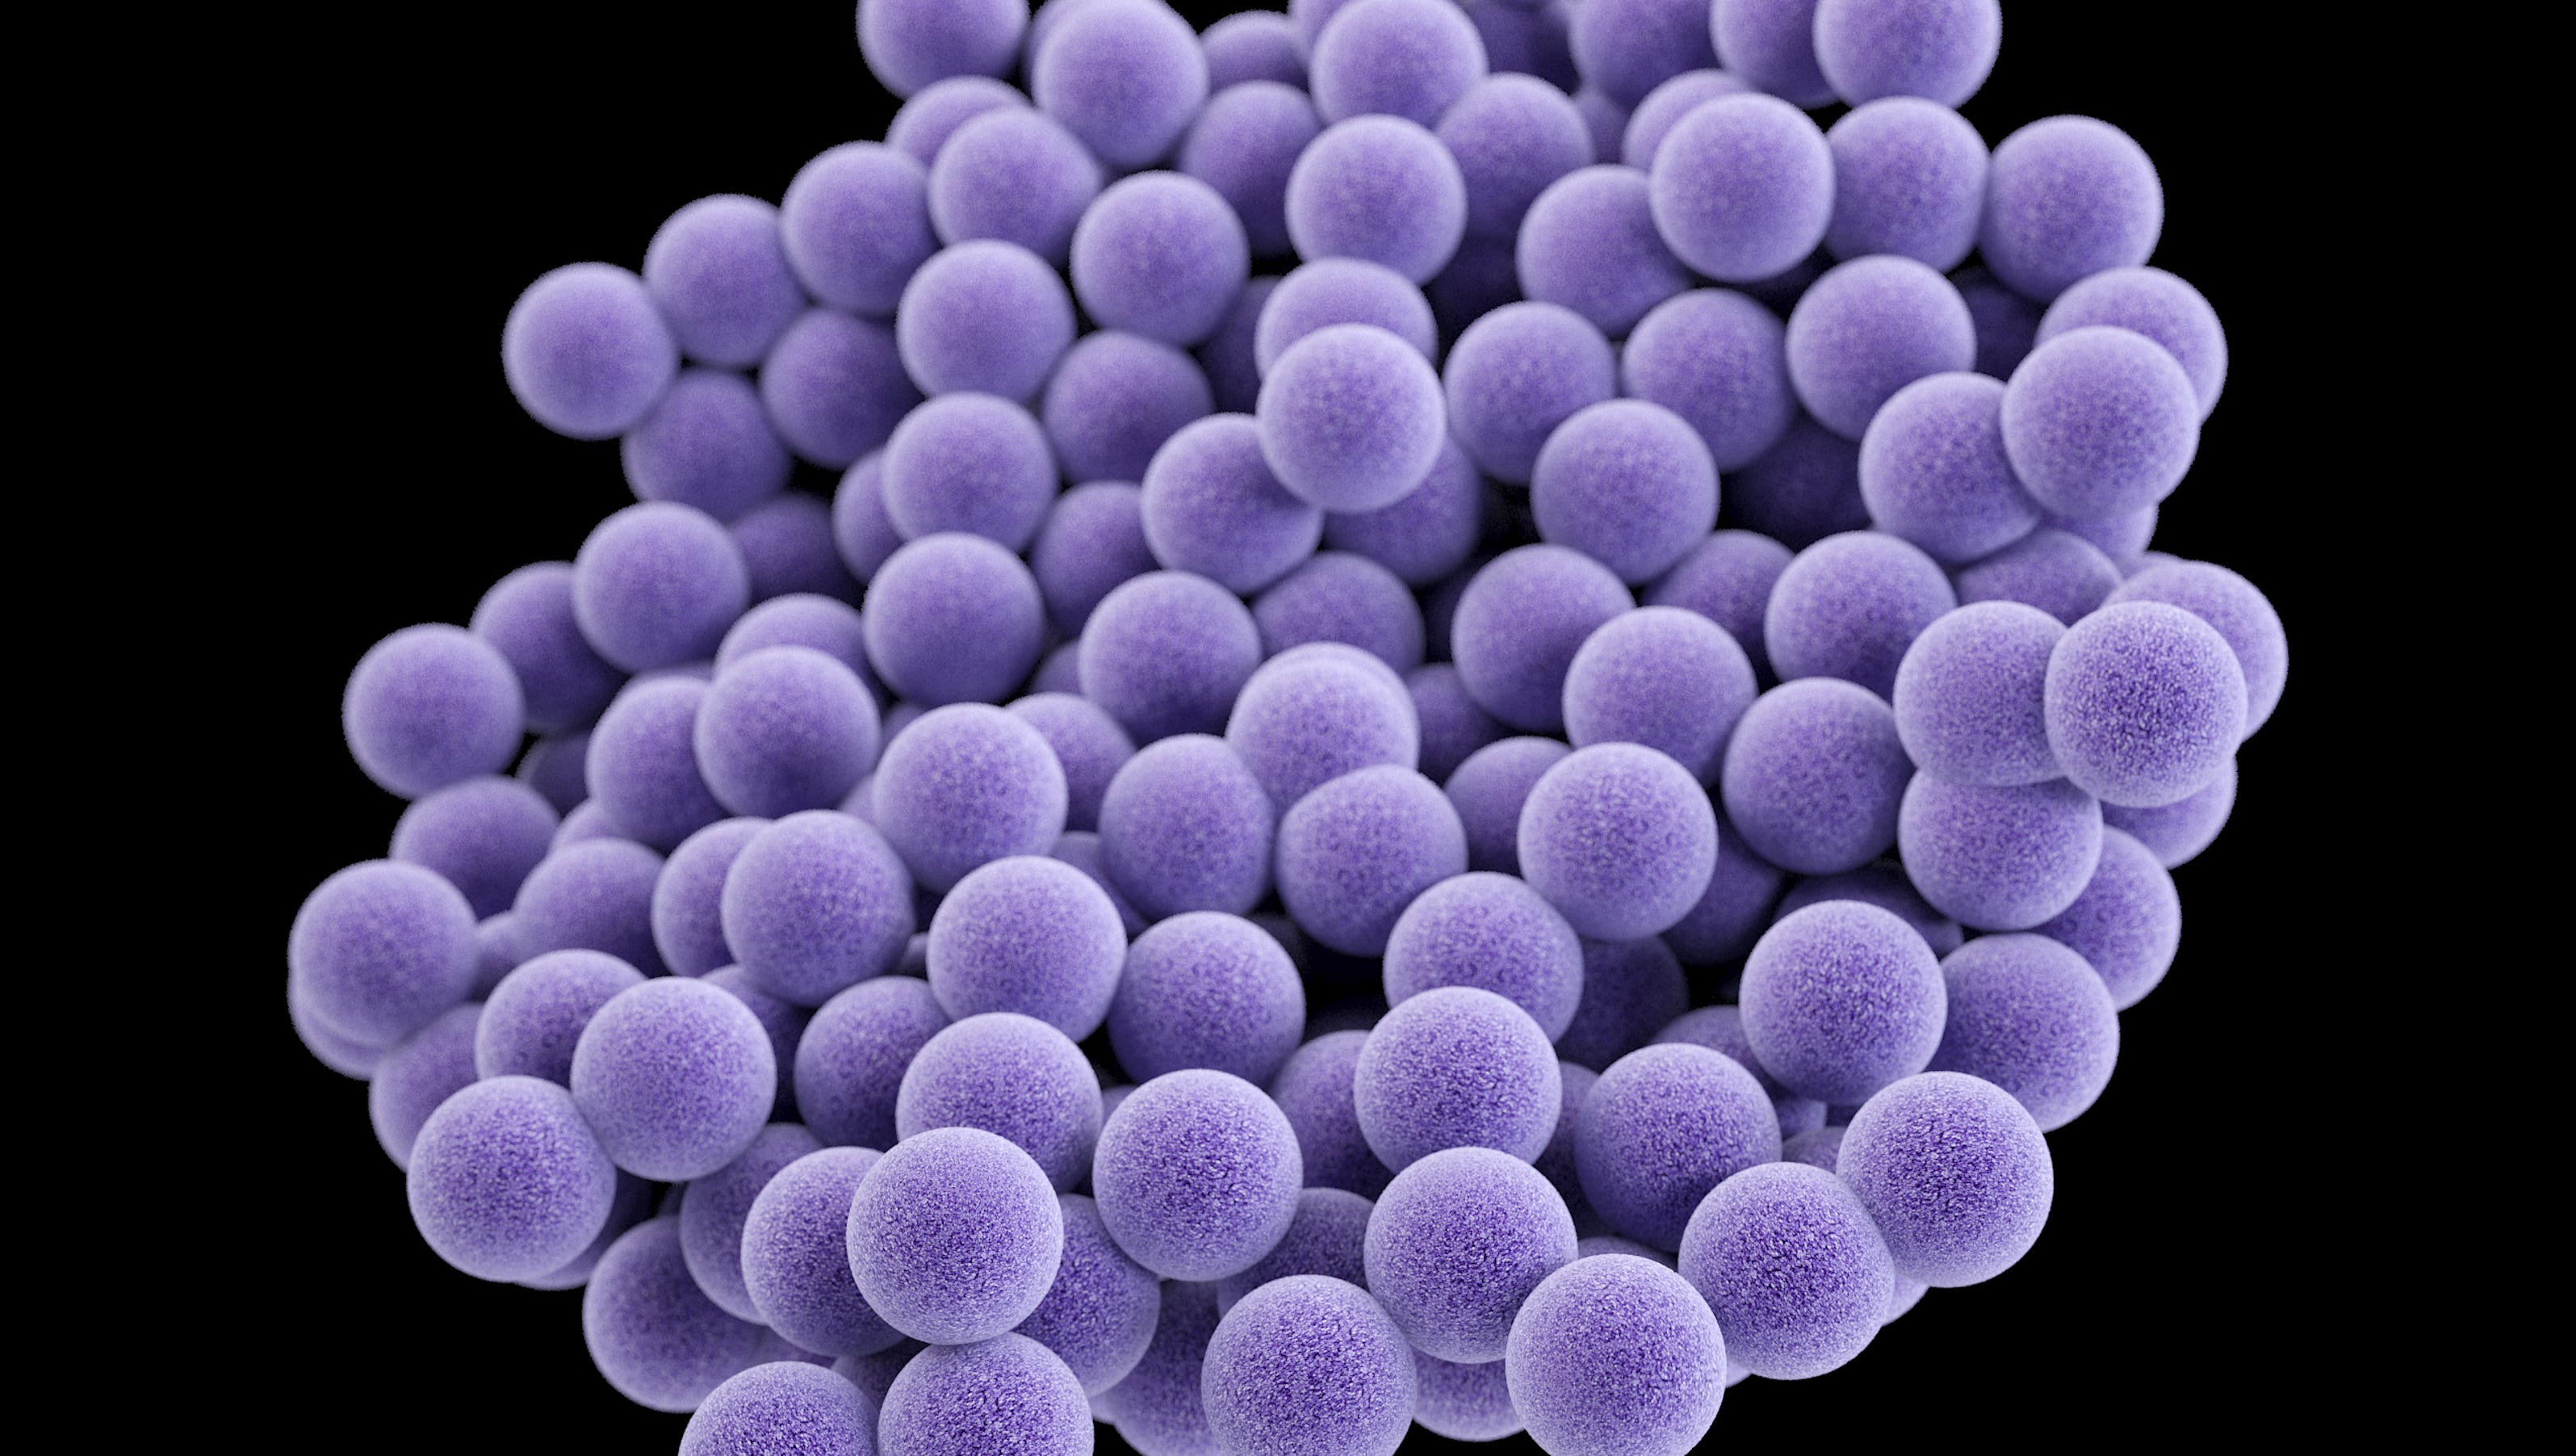 Scientists discover potentially powerful antibiotic